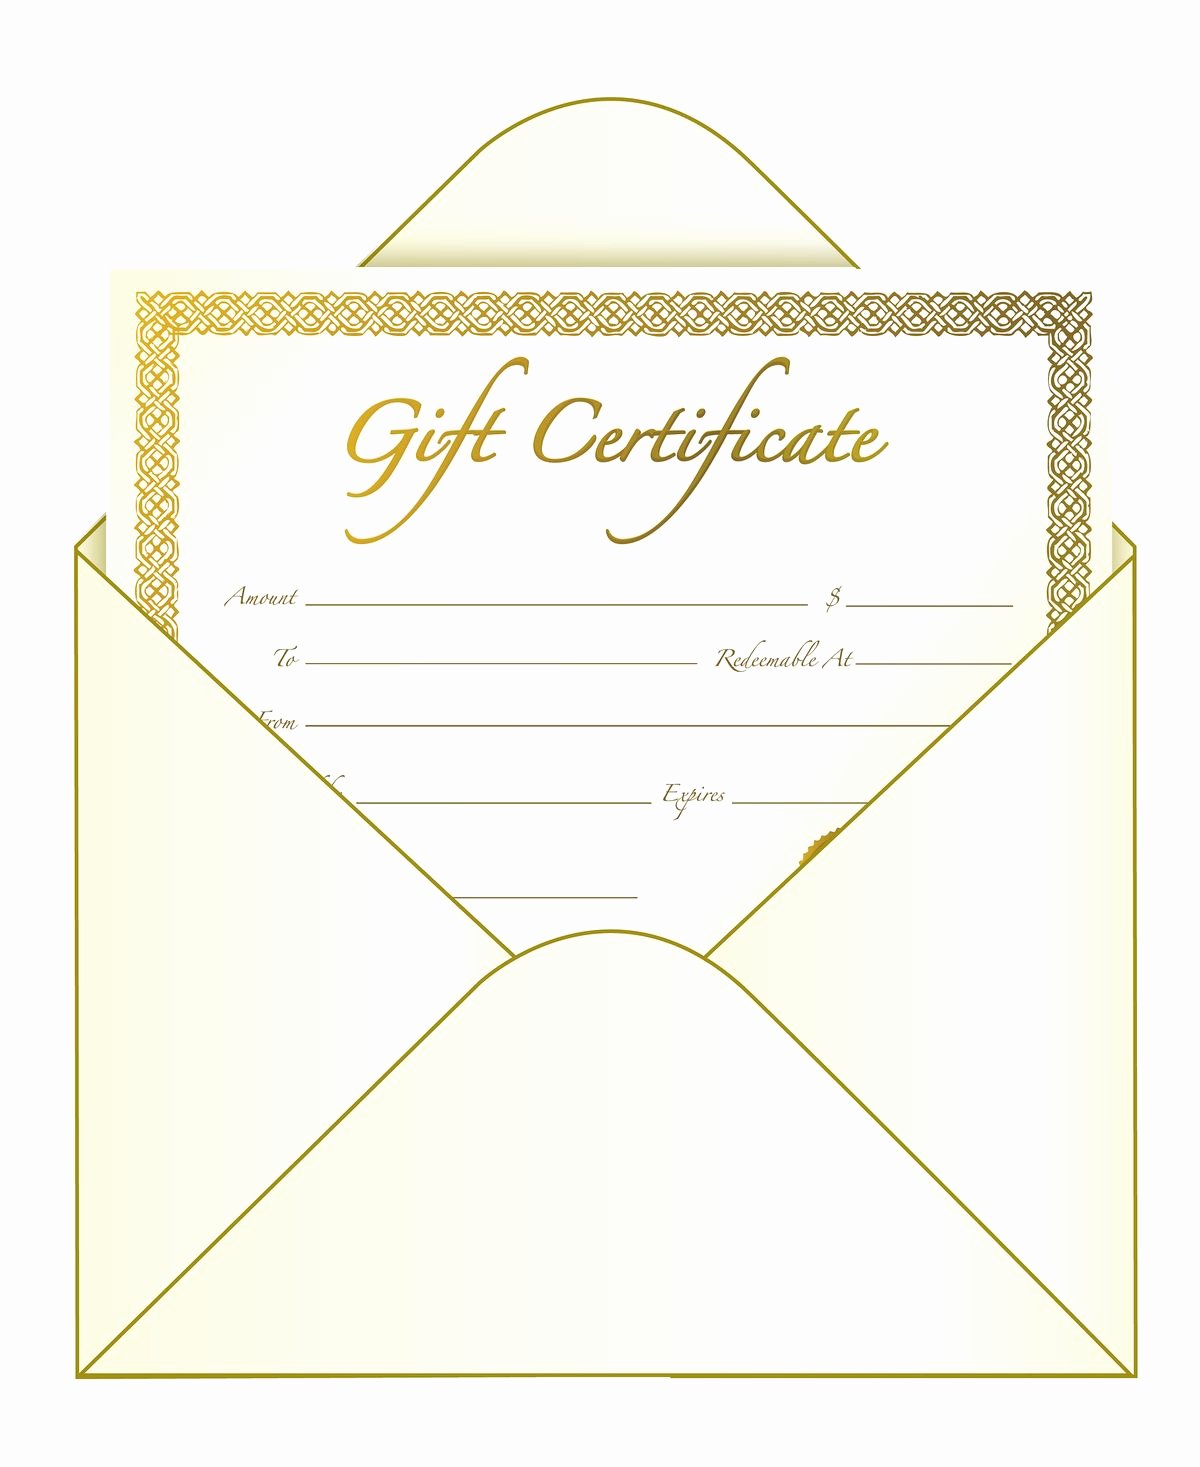 House Cleaning Gift Certificate Template Luxury ask Us About Gift Certificates